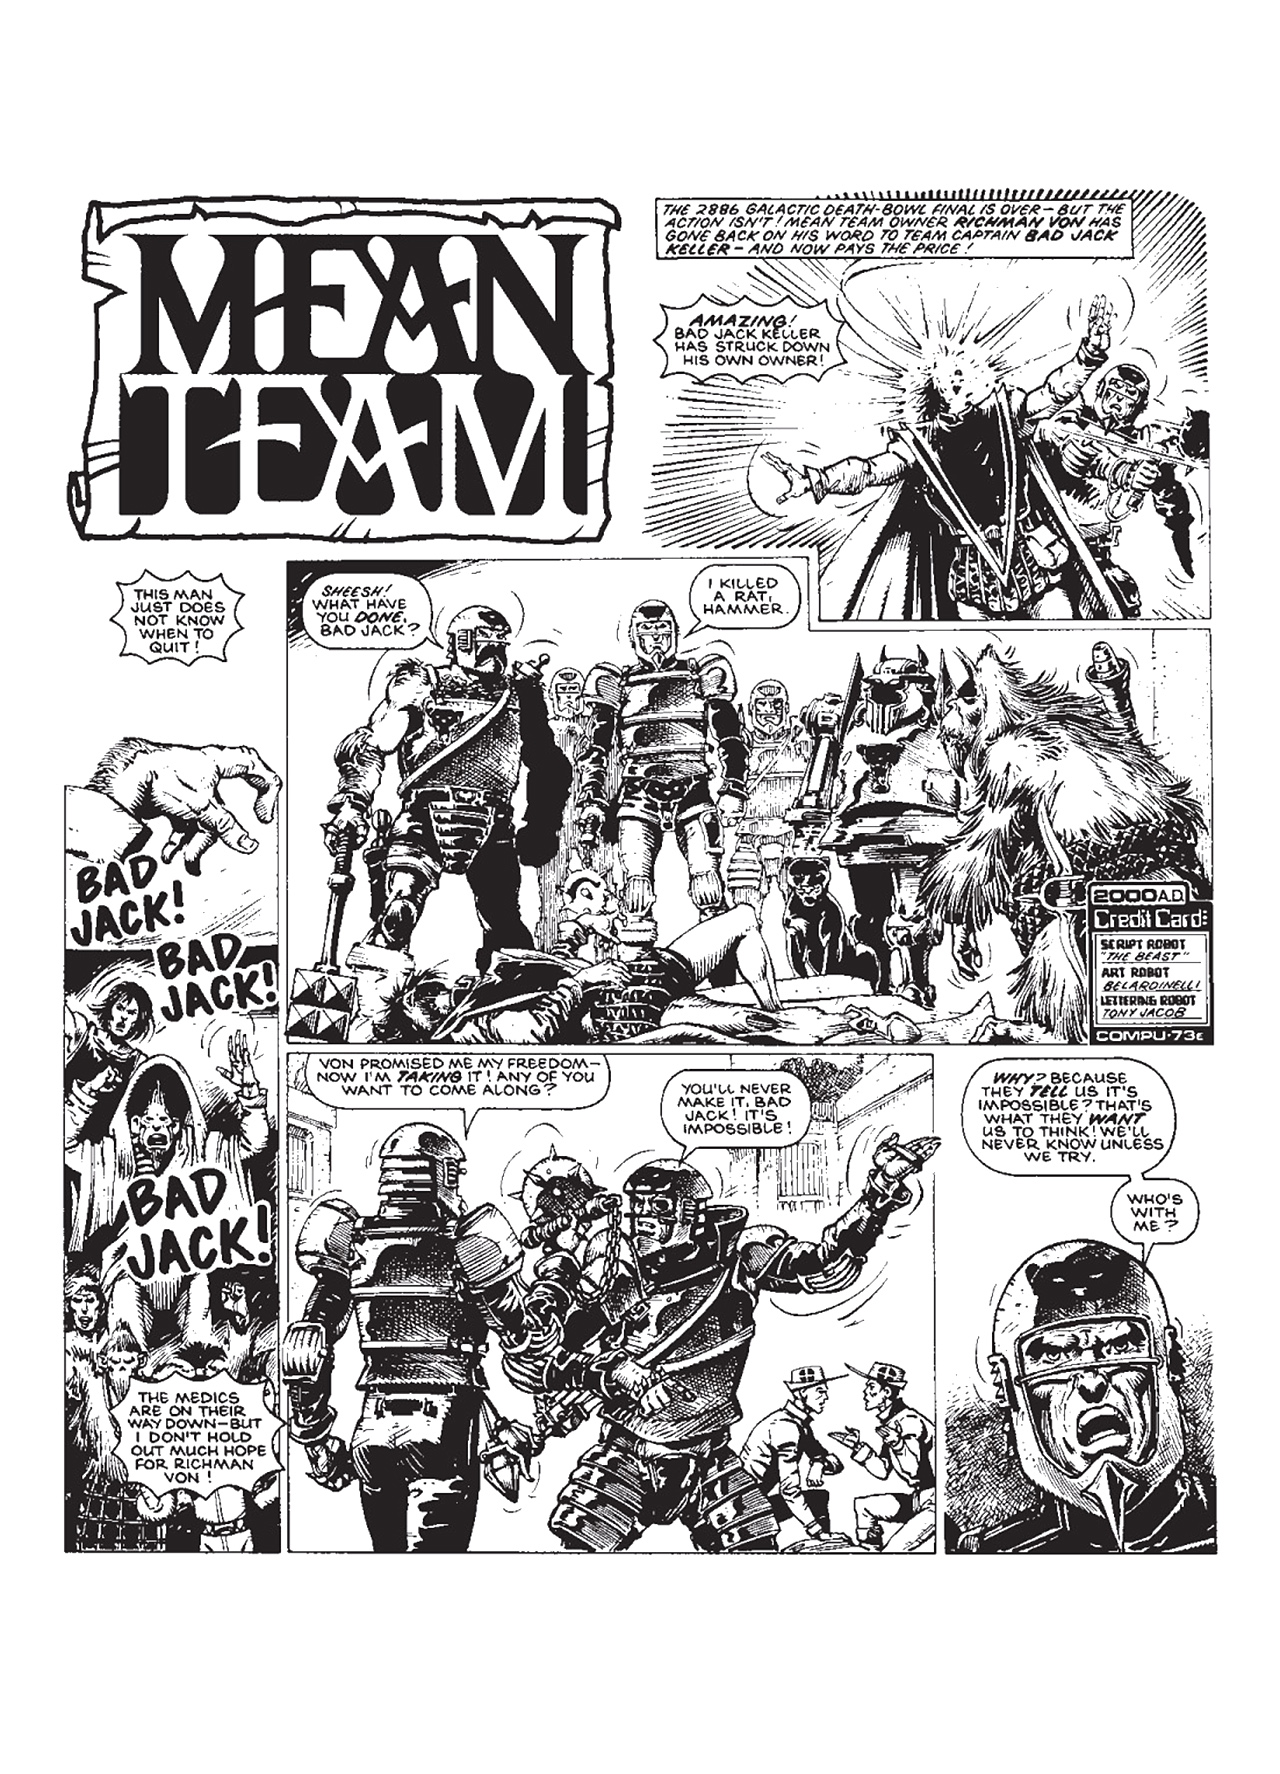 Read online Mean Team comic -  Issue # TPB - 42